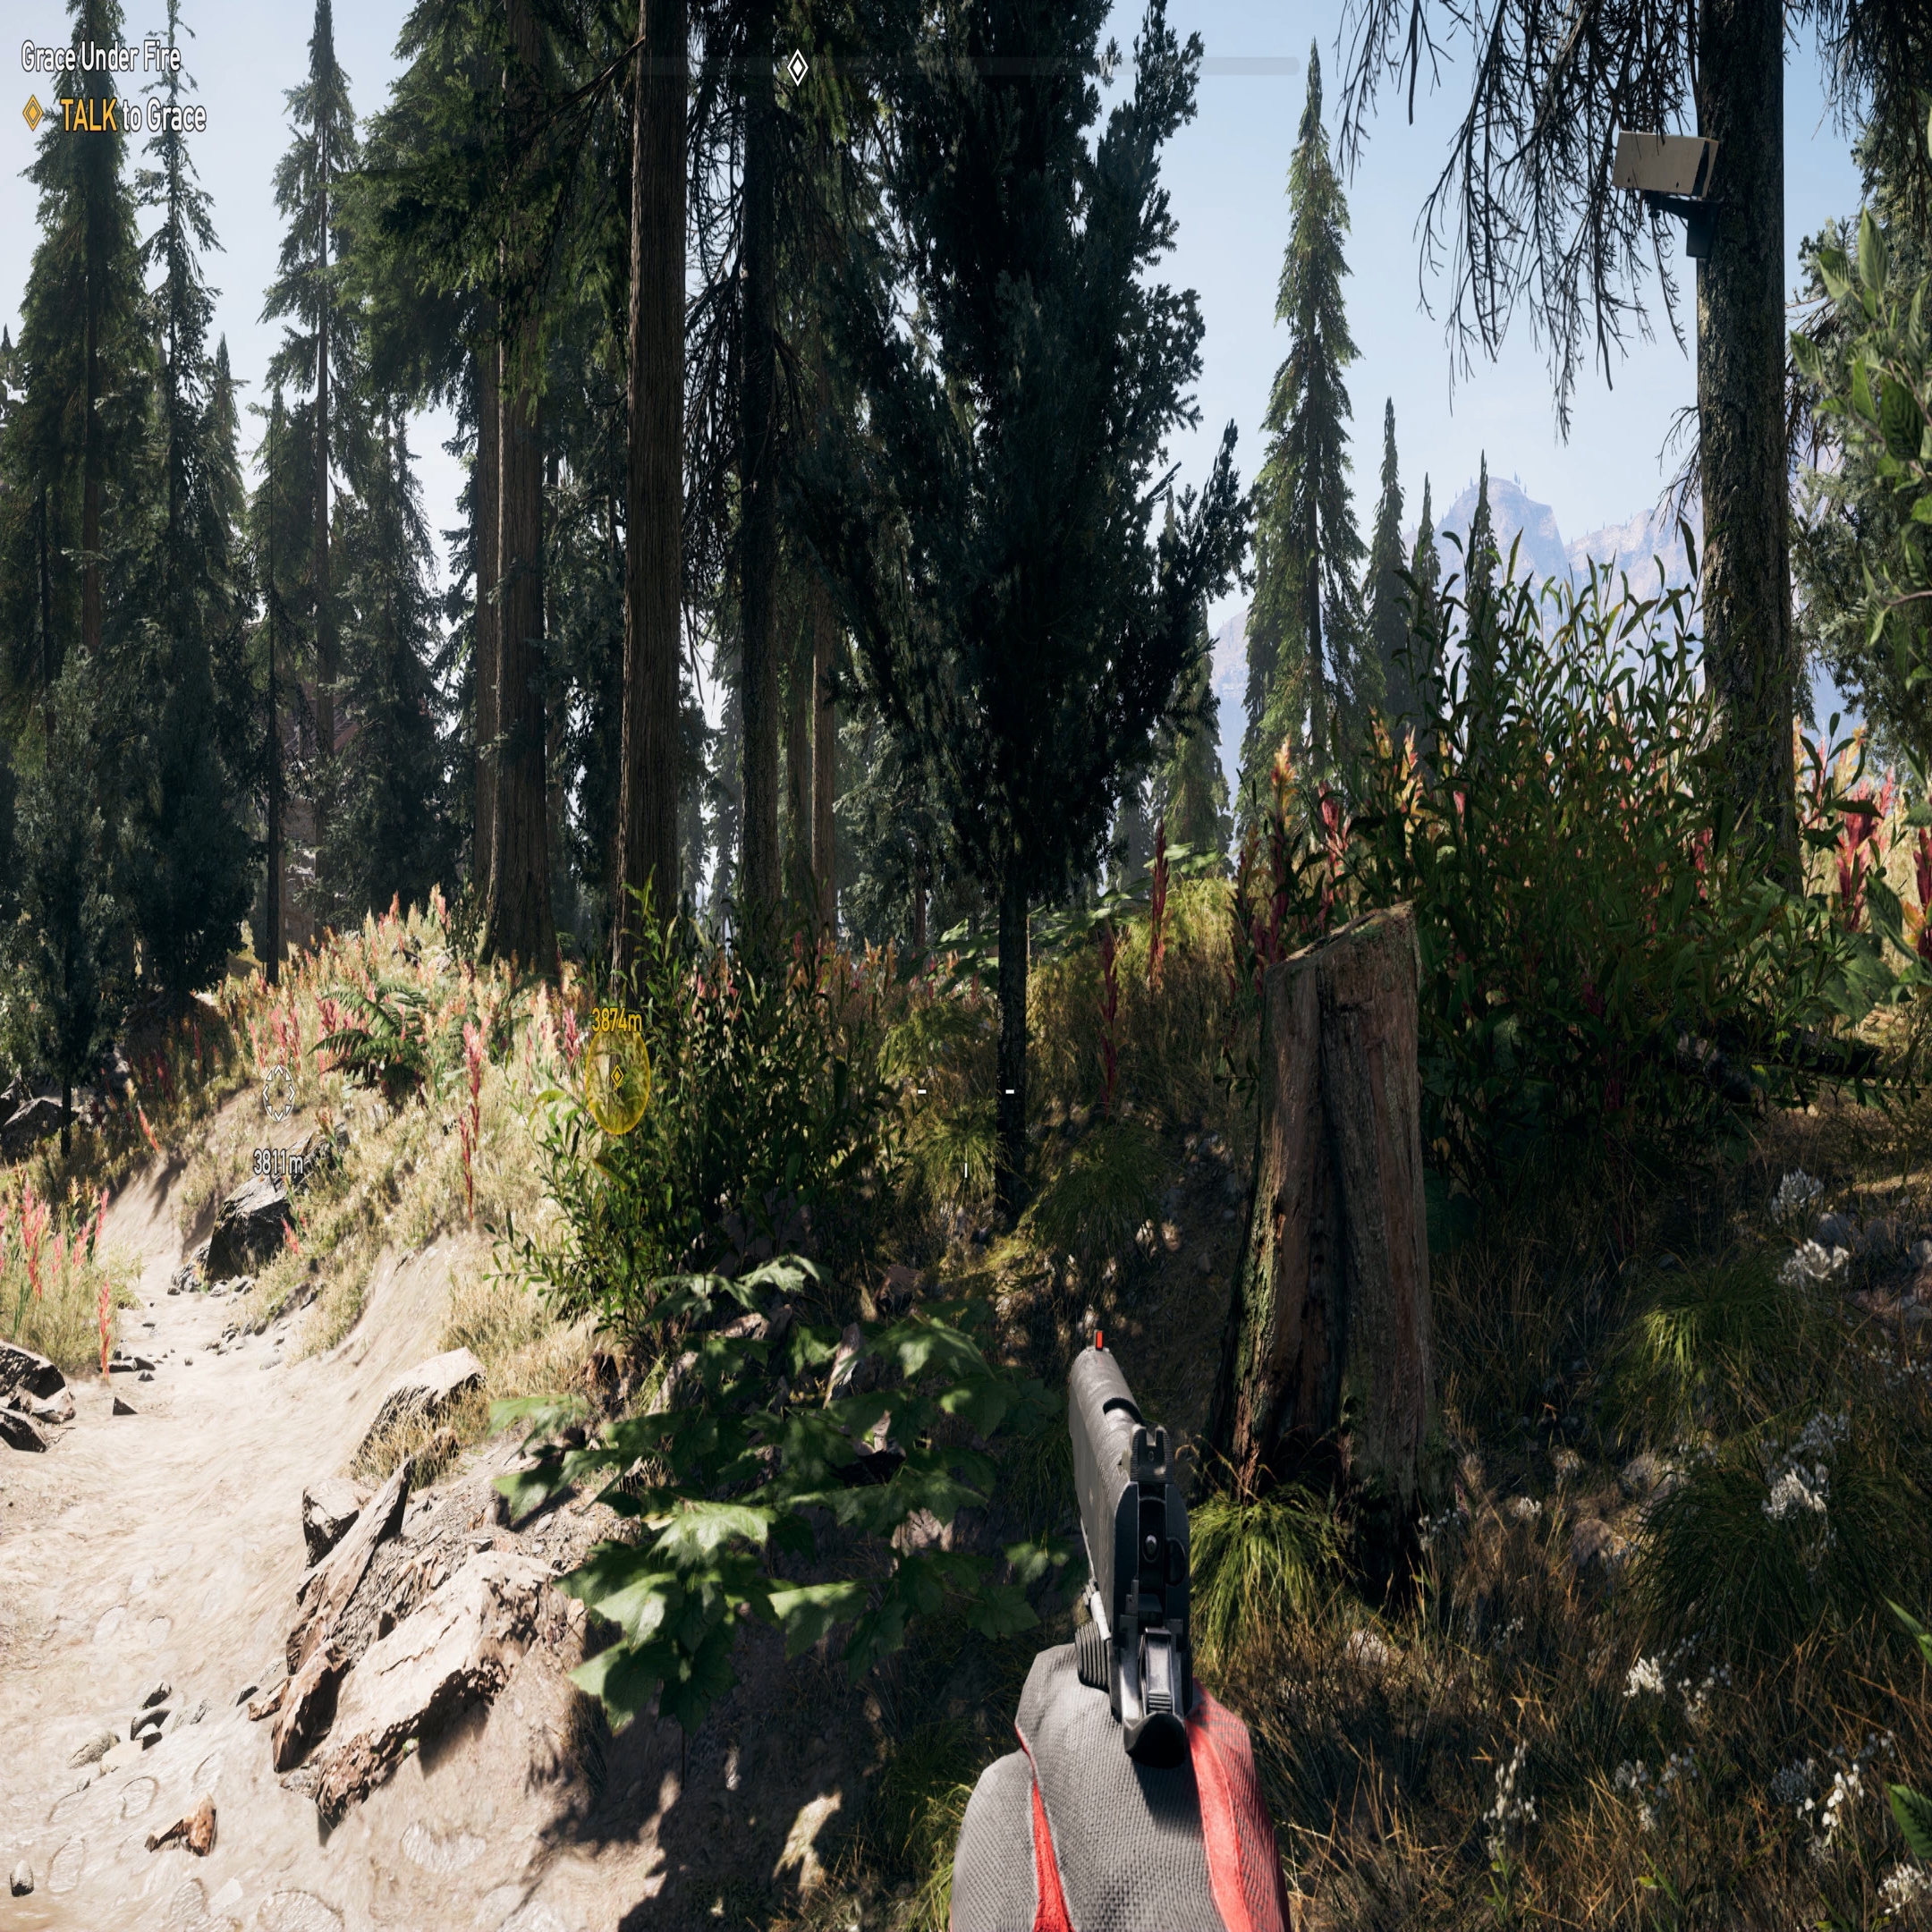 Far Cry 5 Xbox One X Resolution Is 1800p – Report